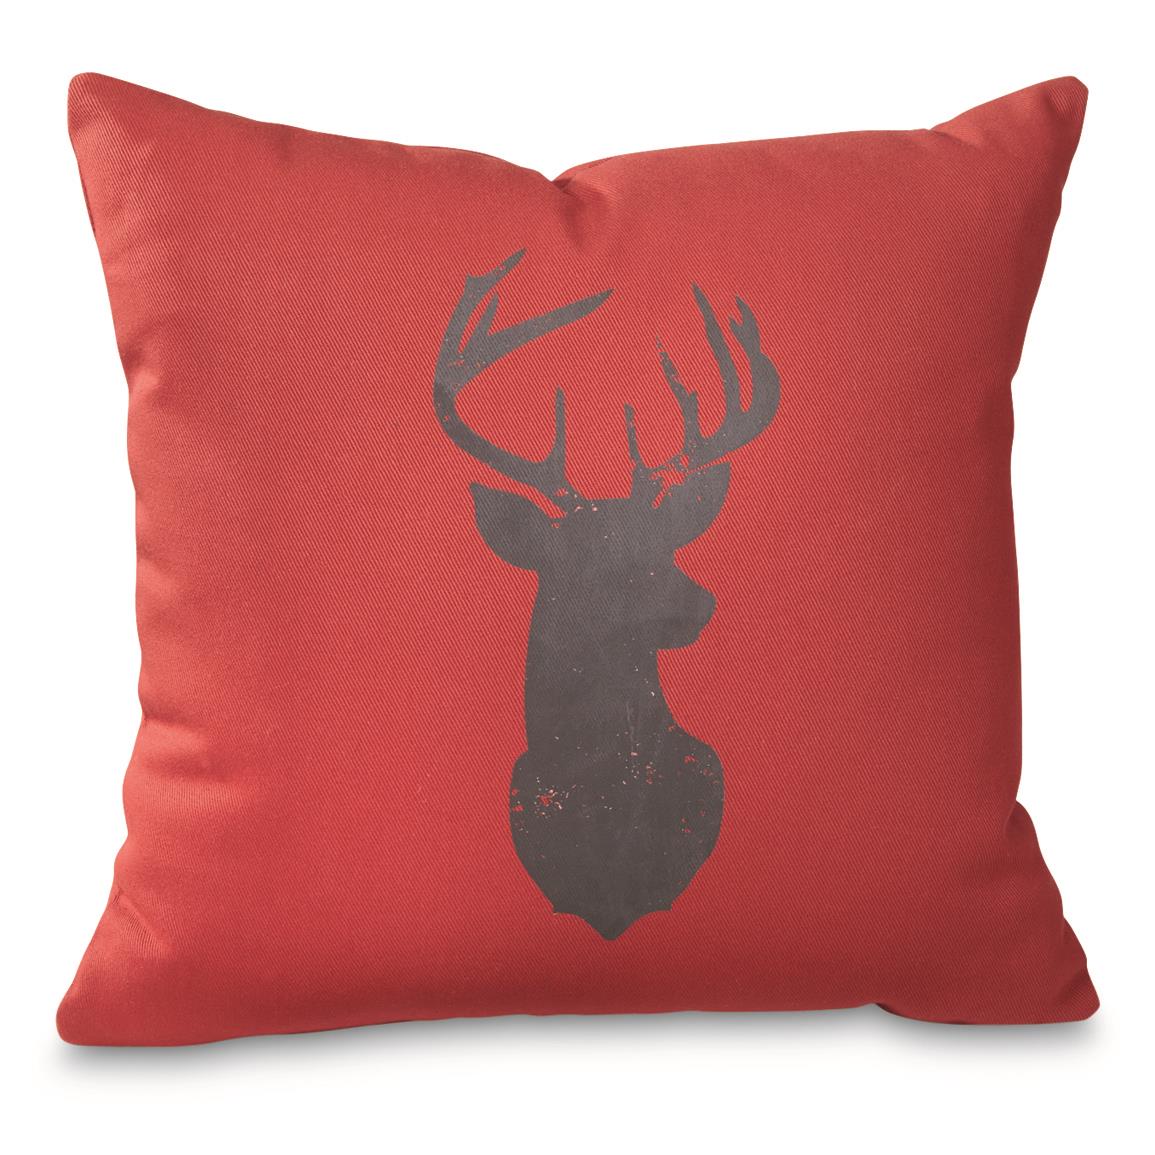 Wooded River Deer Silhouette Decorative Pillow, Cotton Brick